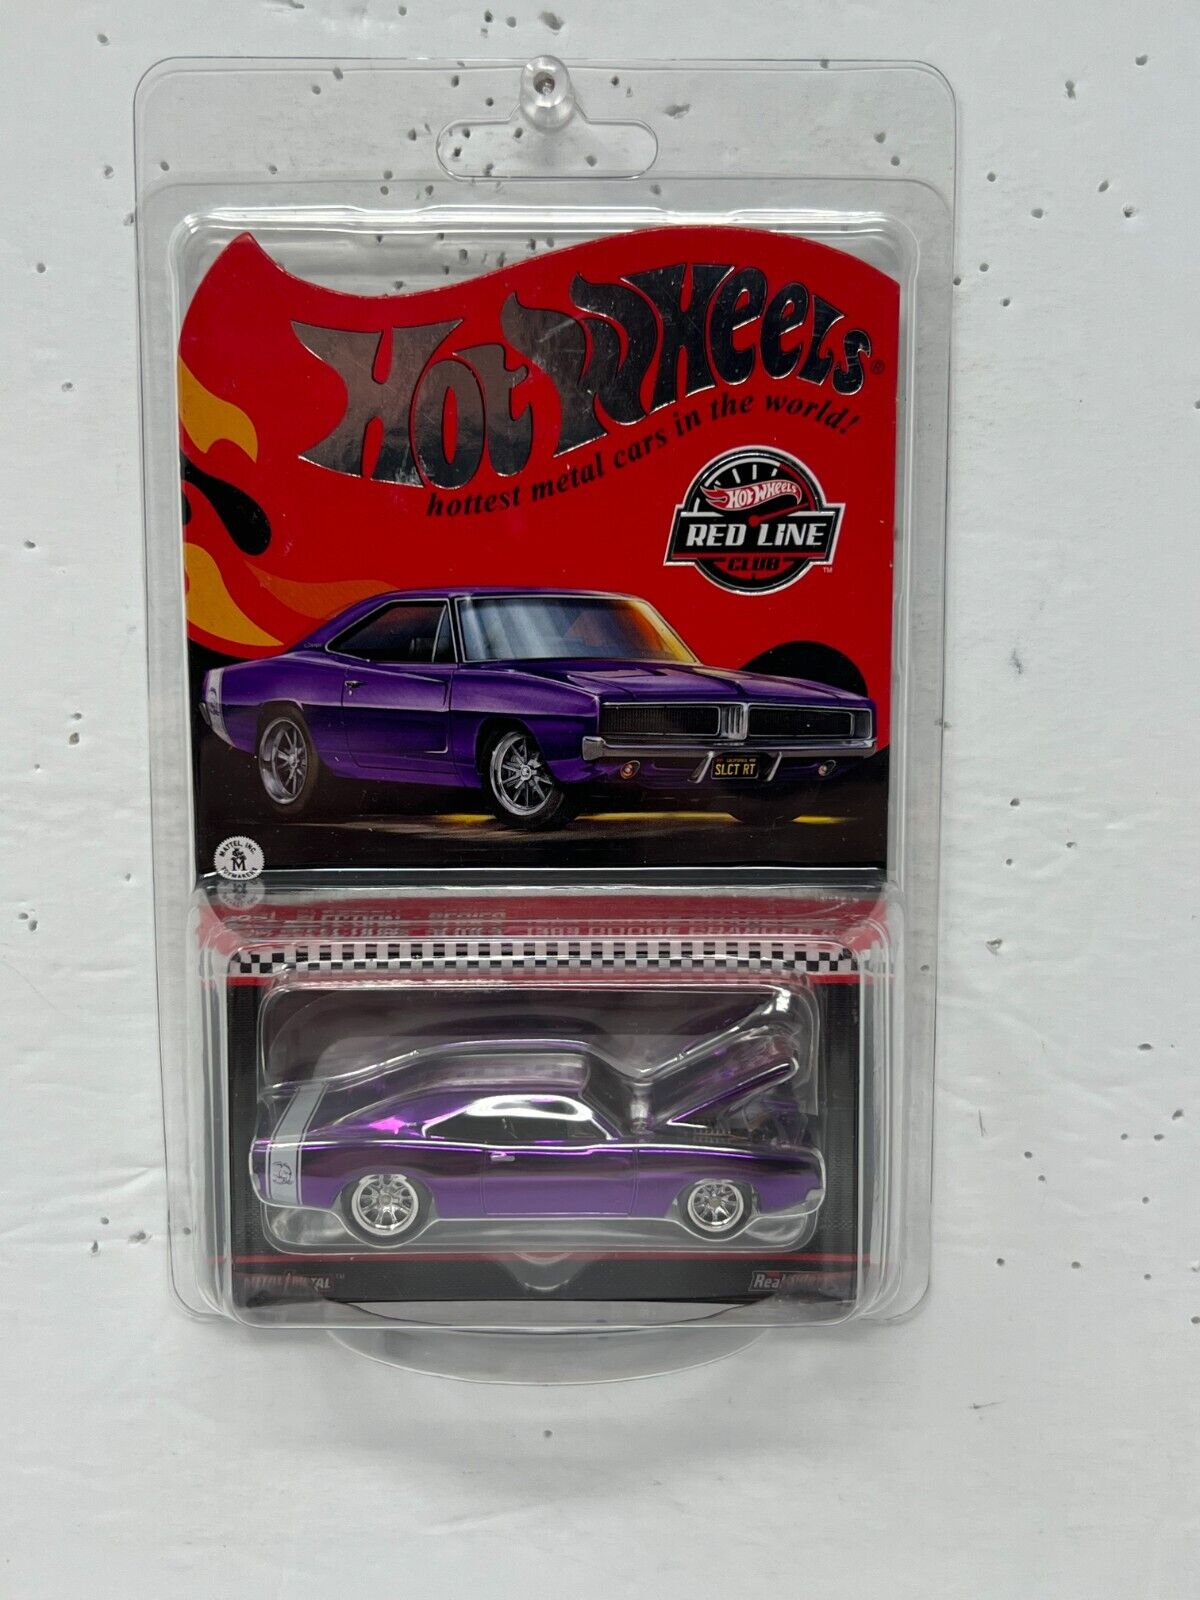 Hot Wheels Selections RLC Red Line Club 1969 Dodge Charger R/T 1:64 Diecast